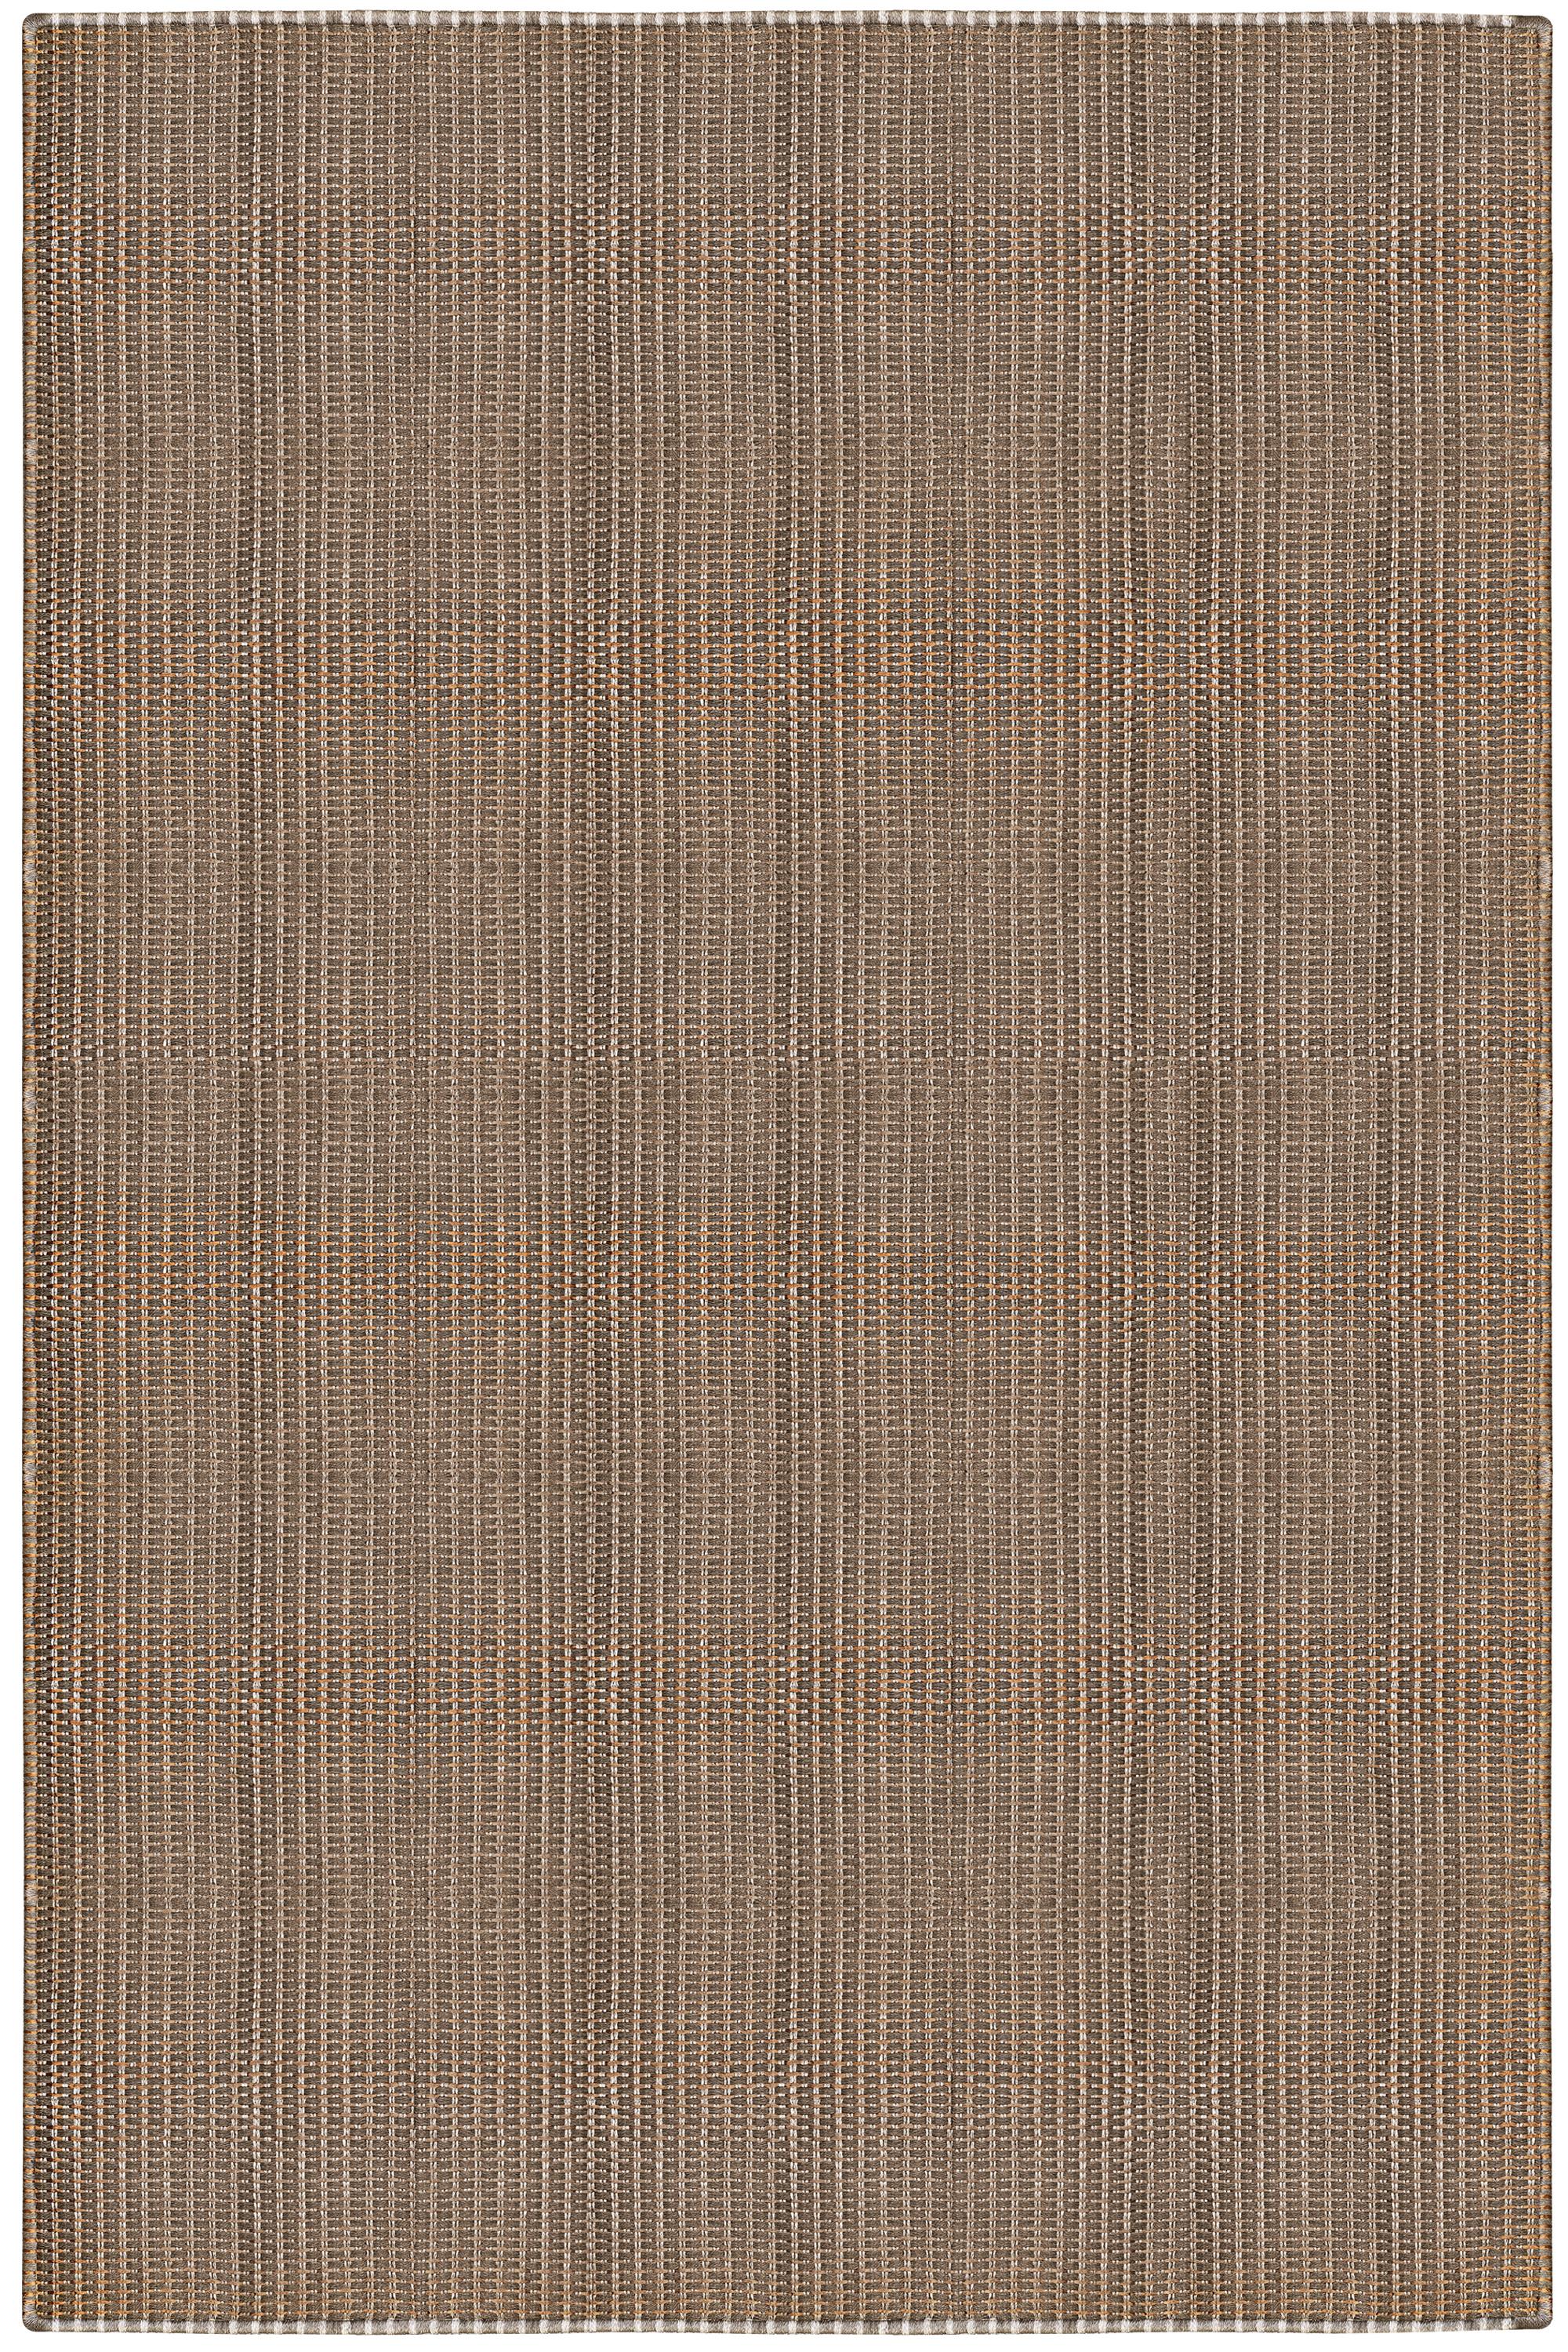 The Faithful rug from the Lines collection has linear patterns in Umber and natural agave, and copper threads, which create subtle sense of profundity. This creation is made of 70% Colombian agave fiber and 30% copper threads, and has 500 threads /